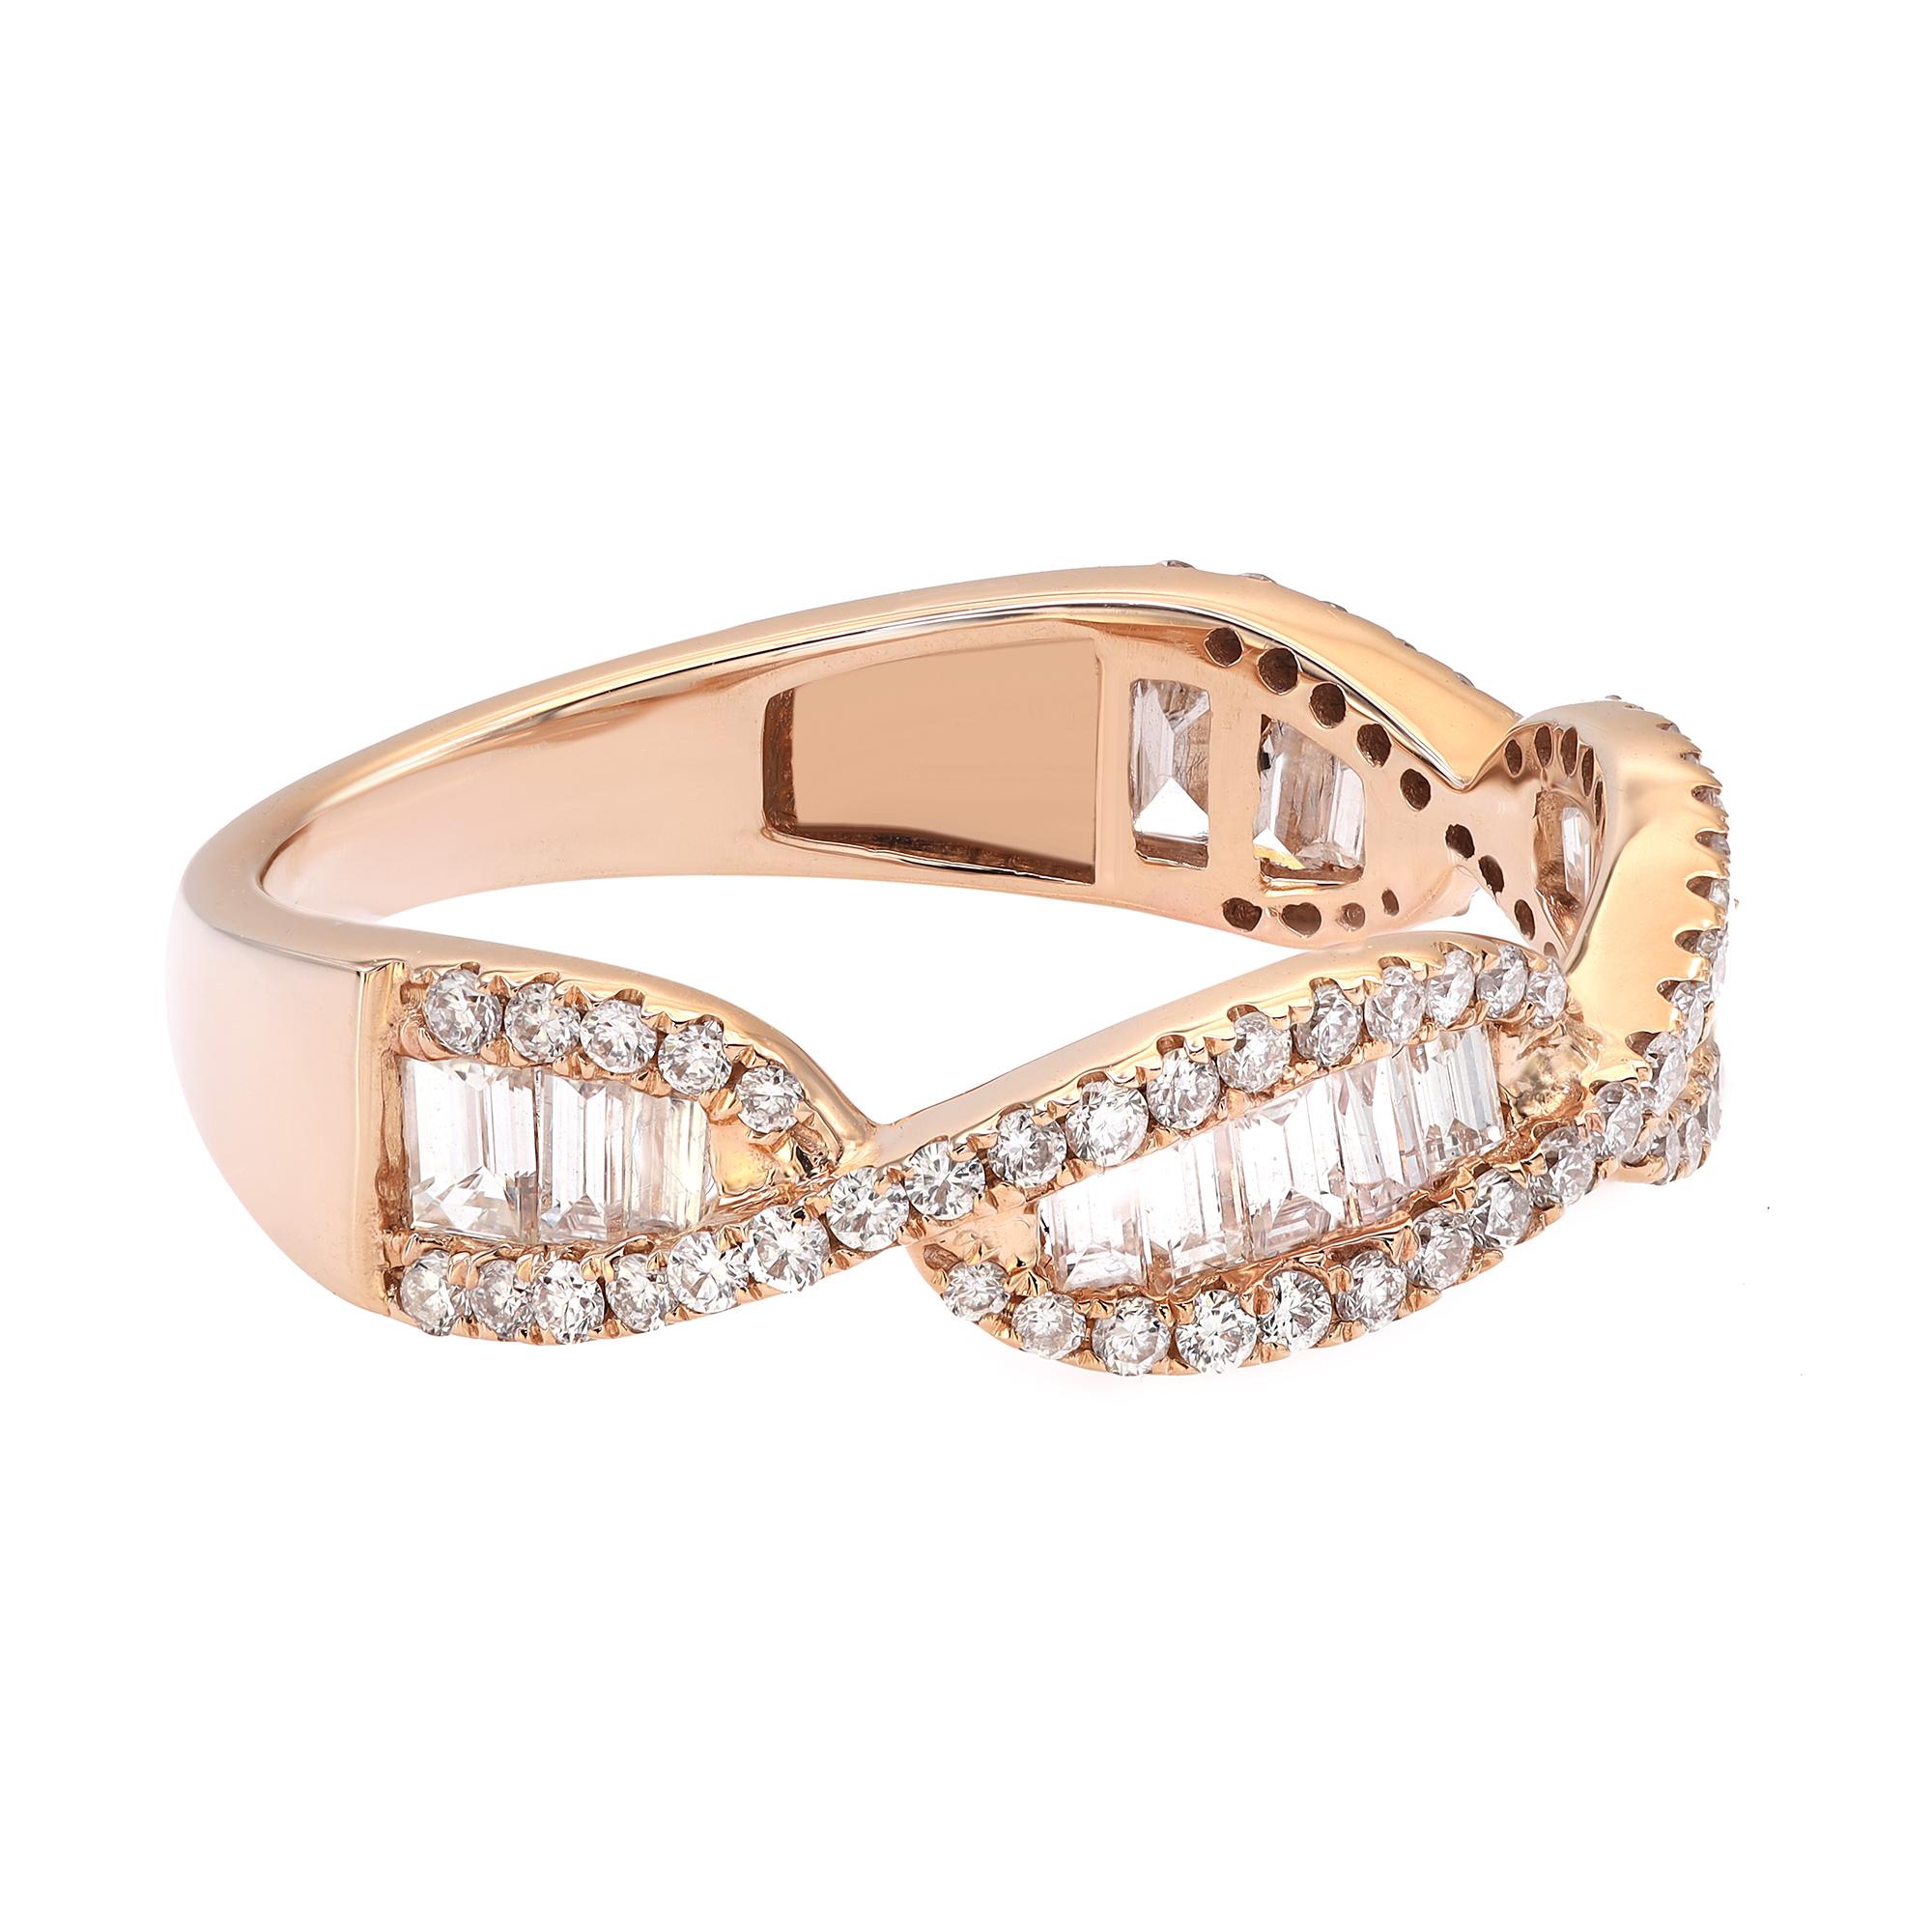 Simple and elegant, diamond twist wedding ring. Crafted in bright 18k rose gold. It features two rows of petite pave set round brilliant cut diamonds intertwine with center channel set baguette cut diamonds for a timeless, eye-catching style. Total